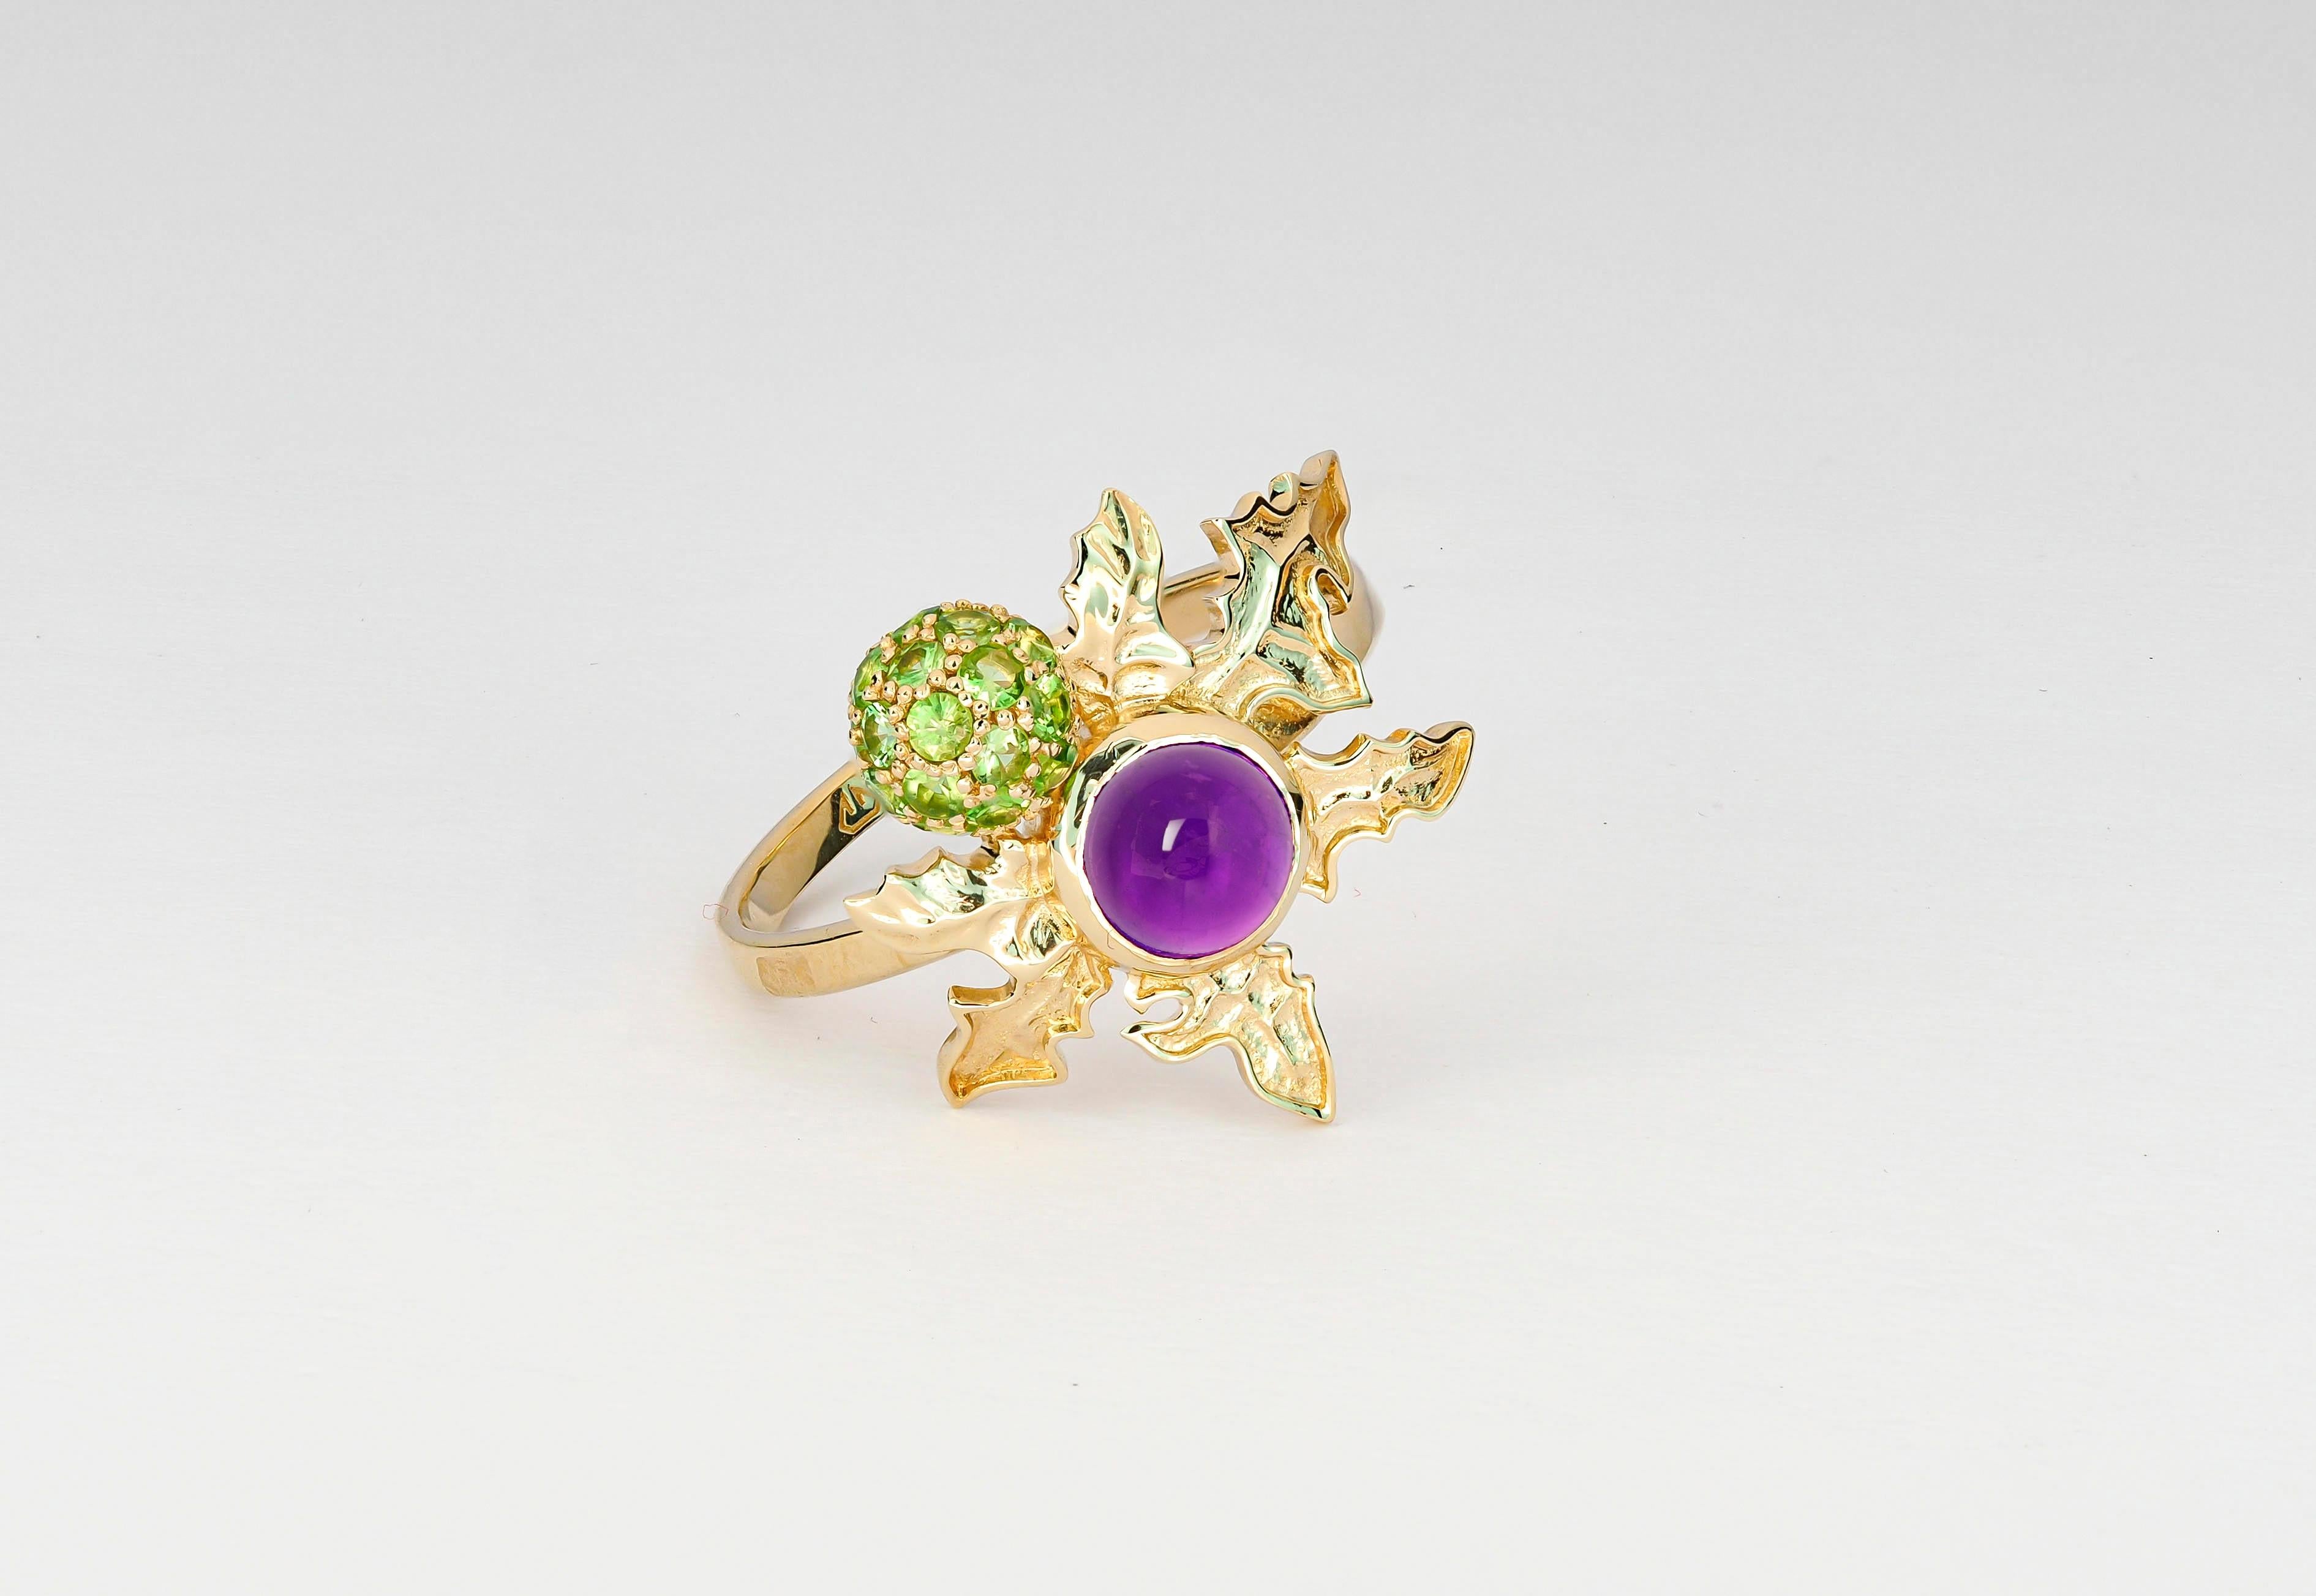 For Sale:  14 K Gold Scottish Thistle Ring with Amethyst and Peridots! 3